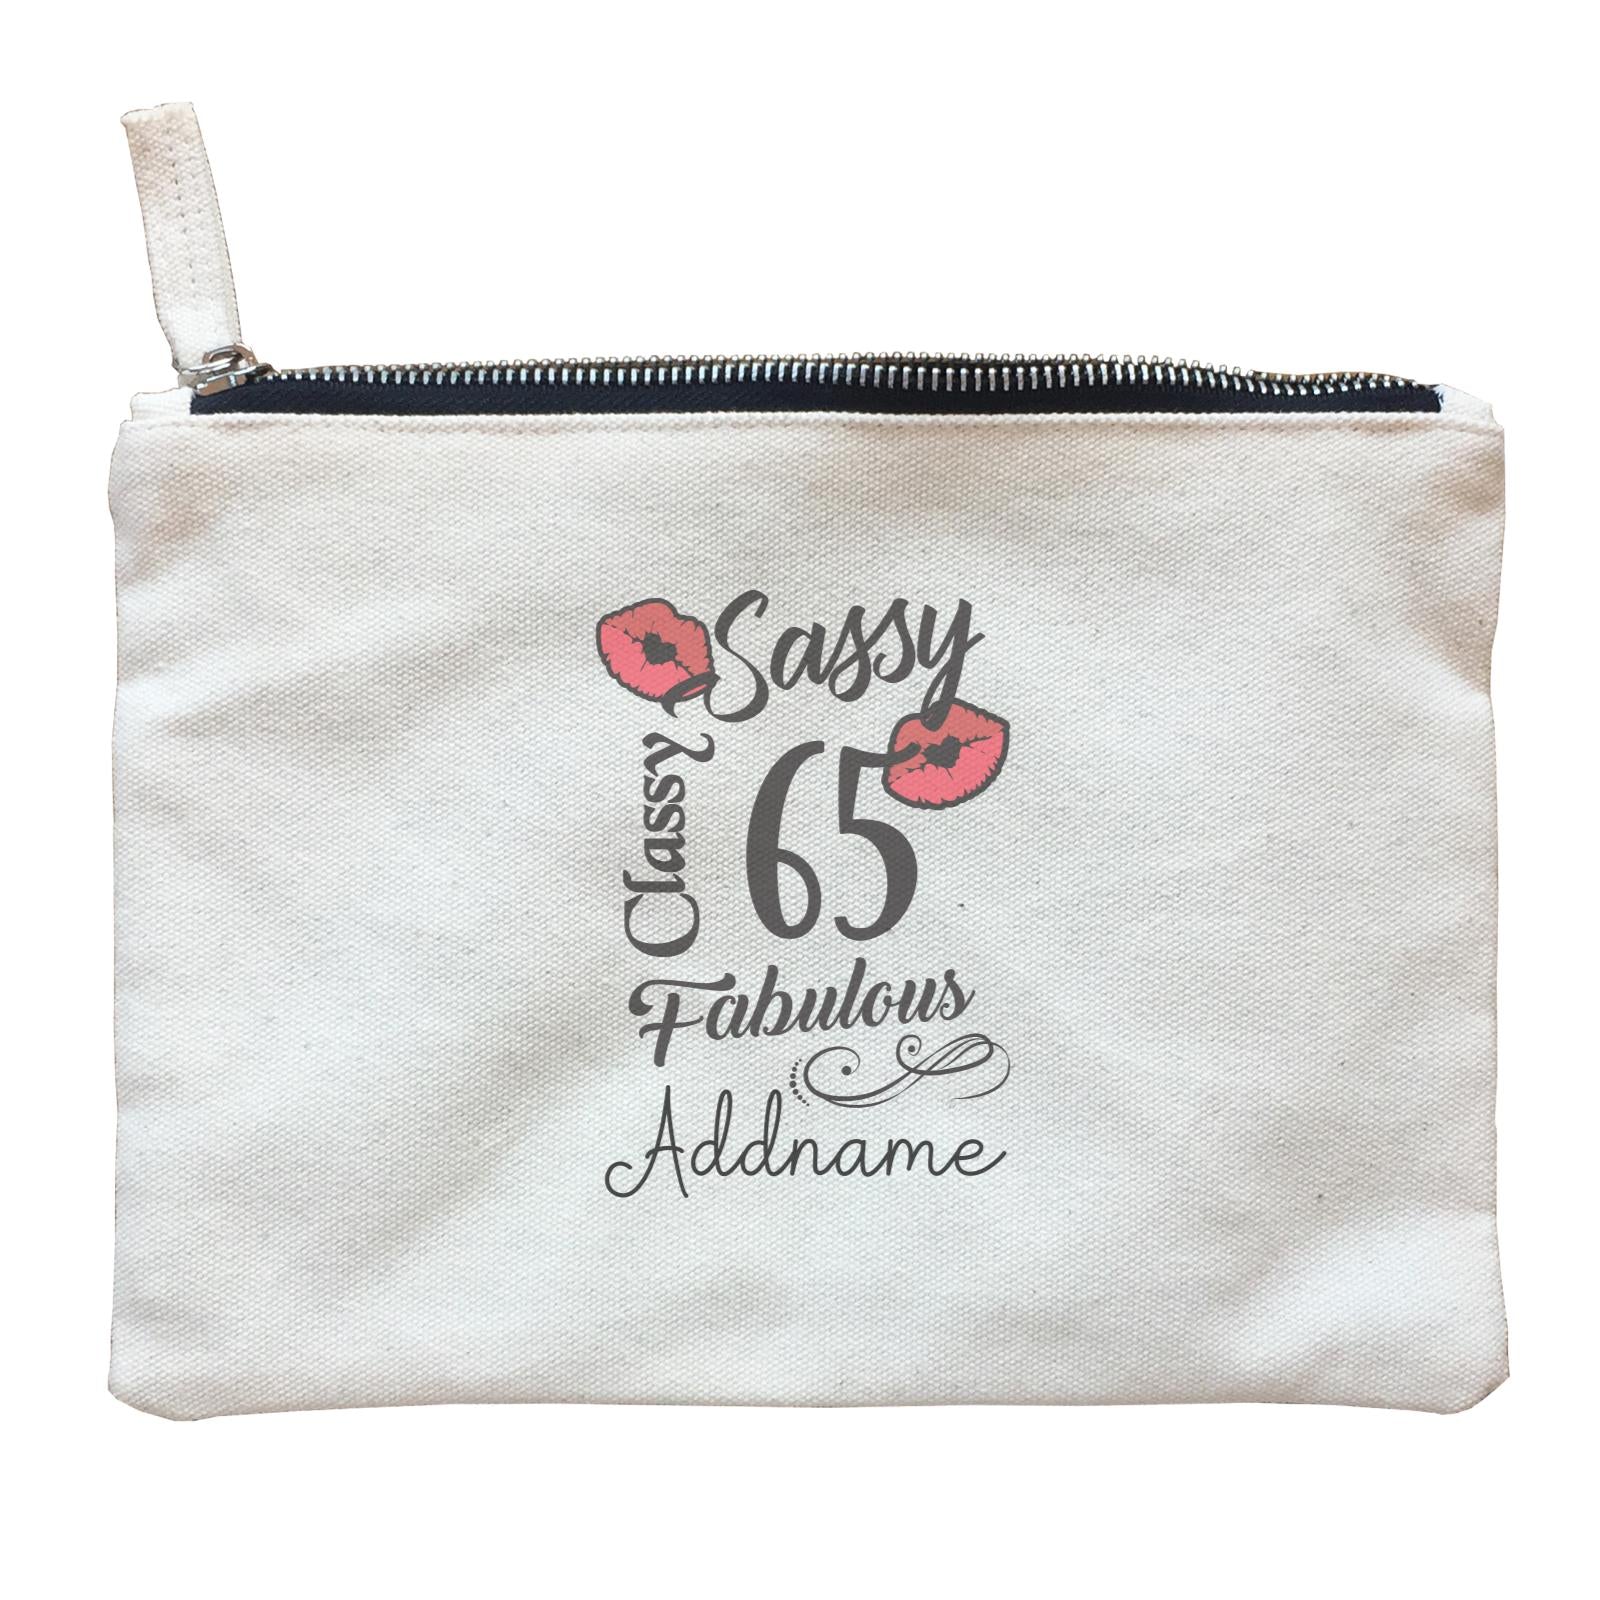 Personalize It Birthyear Sassy Classy and Fabulous with Addname and Add Year Zipper Pouch